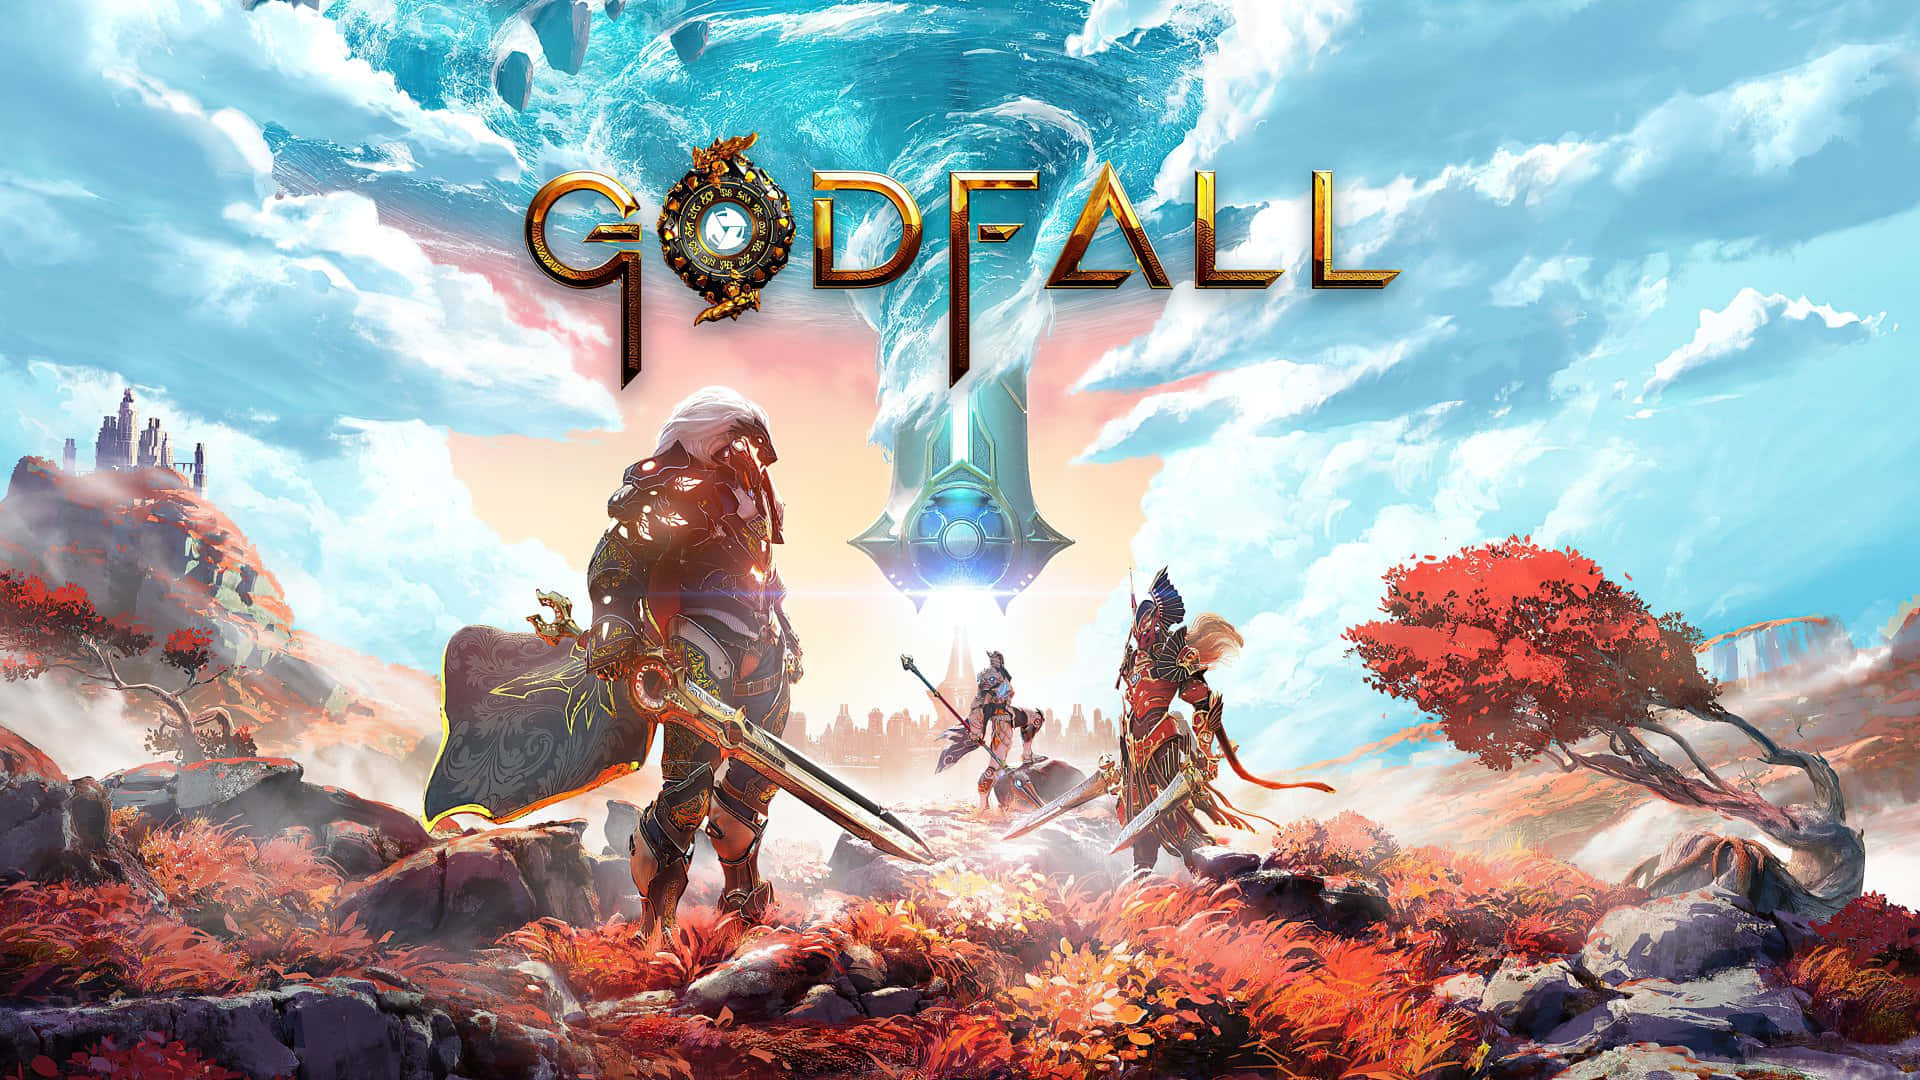 Stand Out From The Crowd with 1080p Godfall